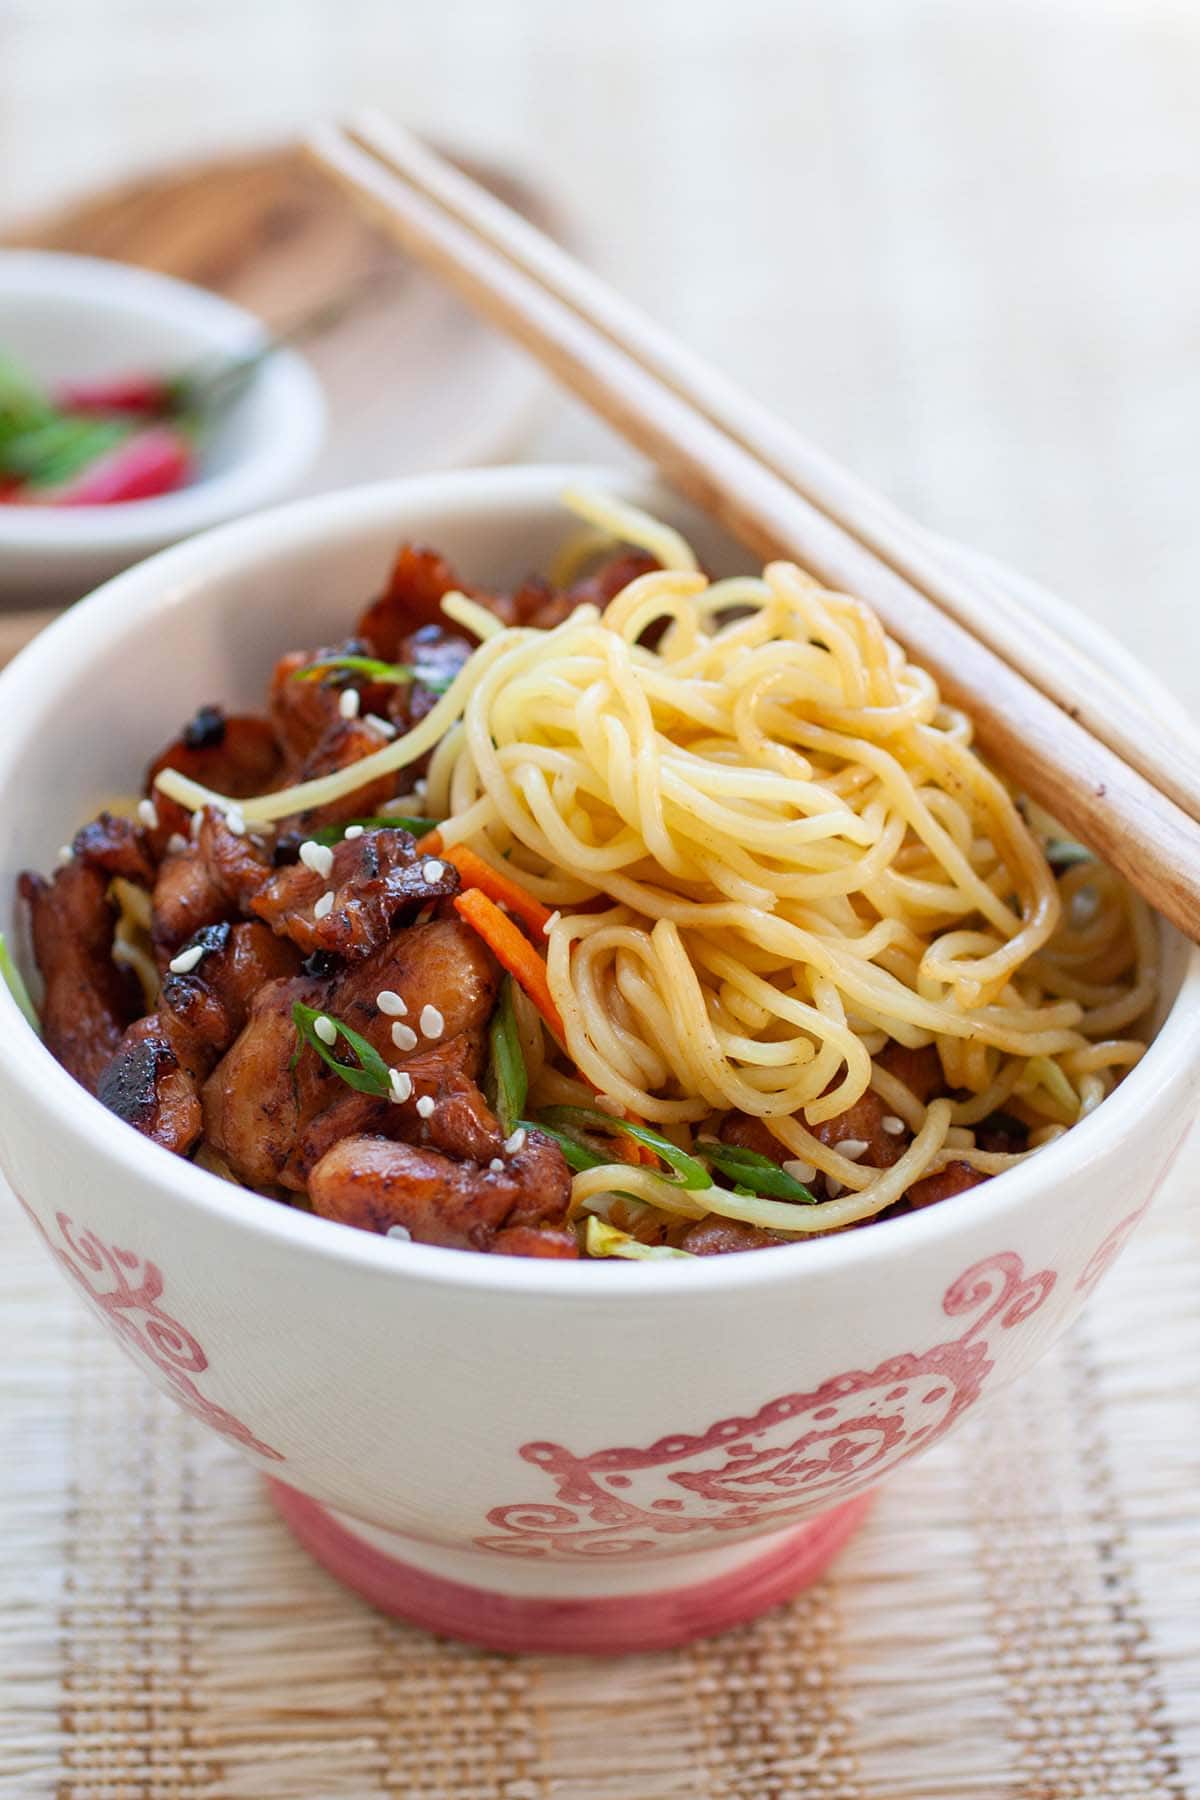 Delicious stir-fried egg noodles with chicken in a bowl, ready to be served.